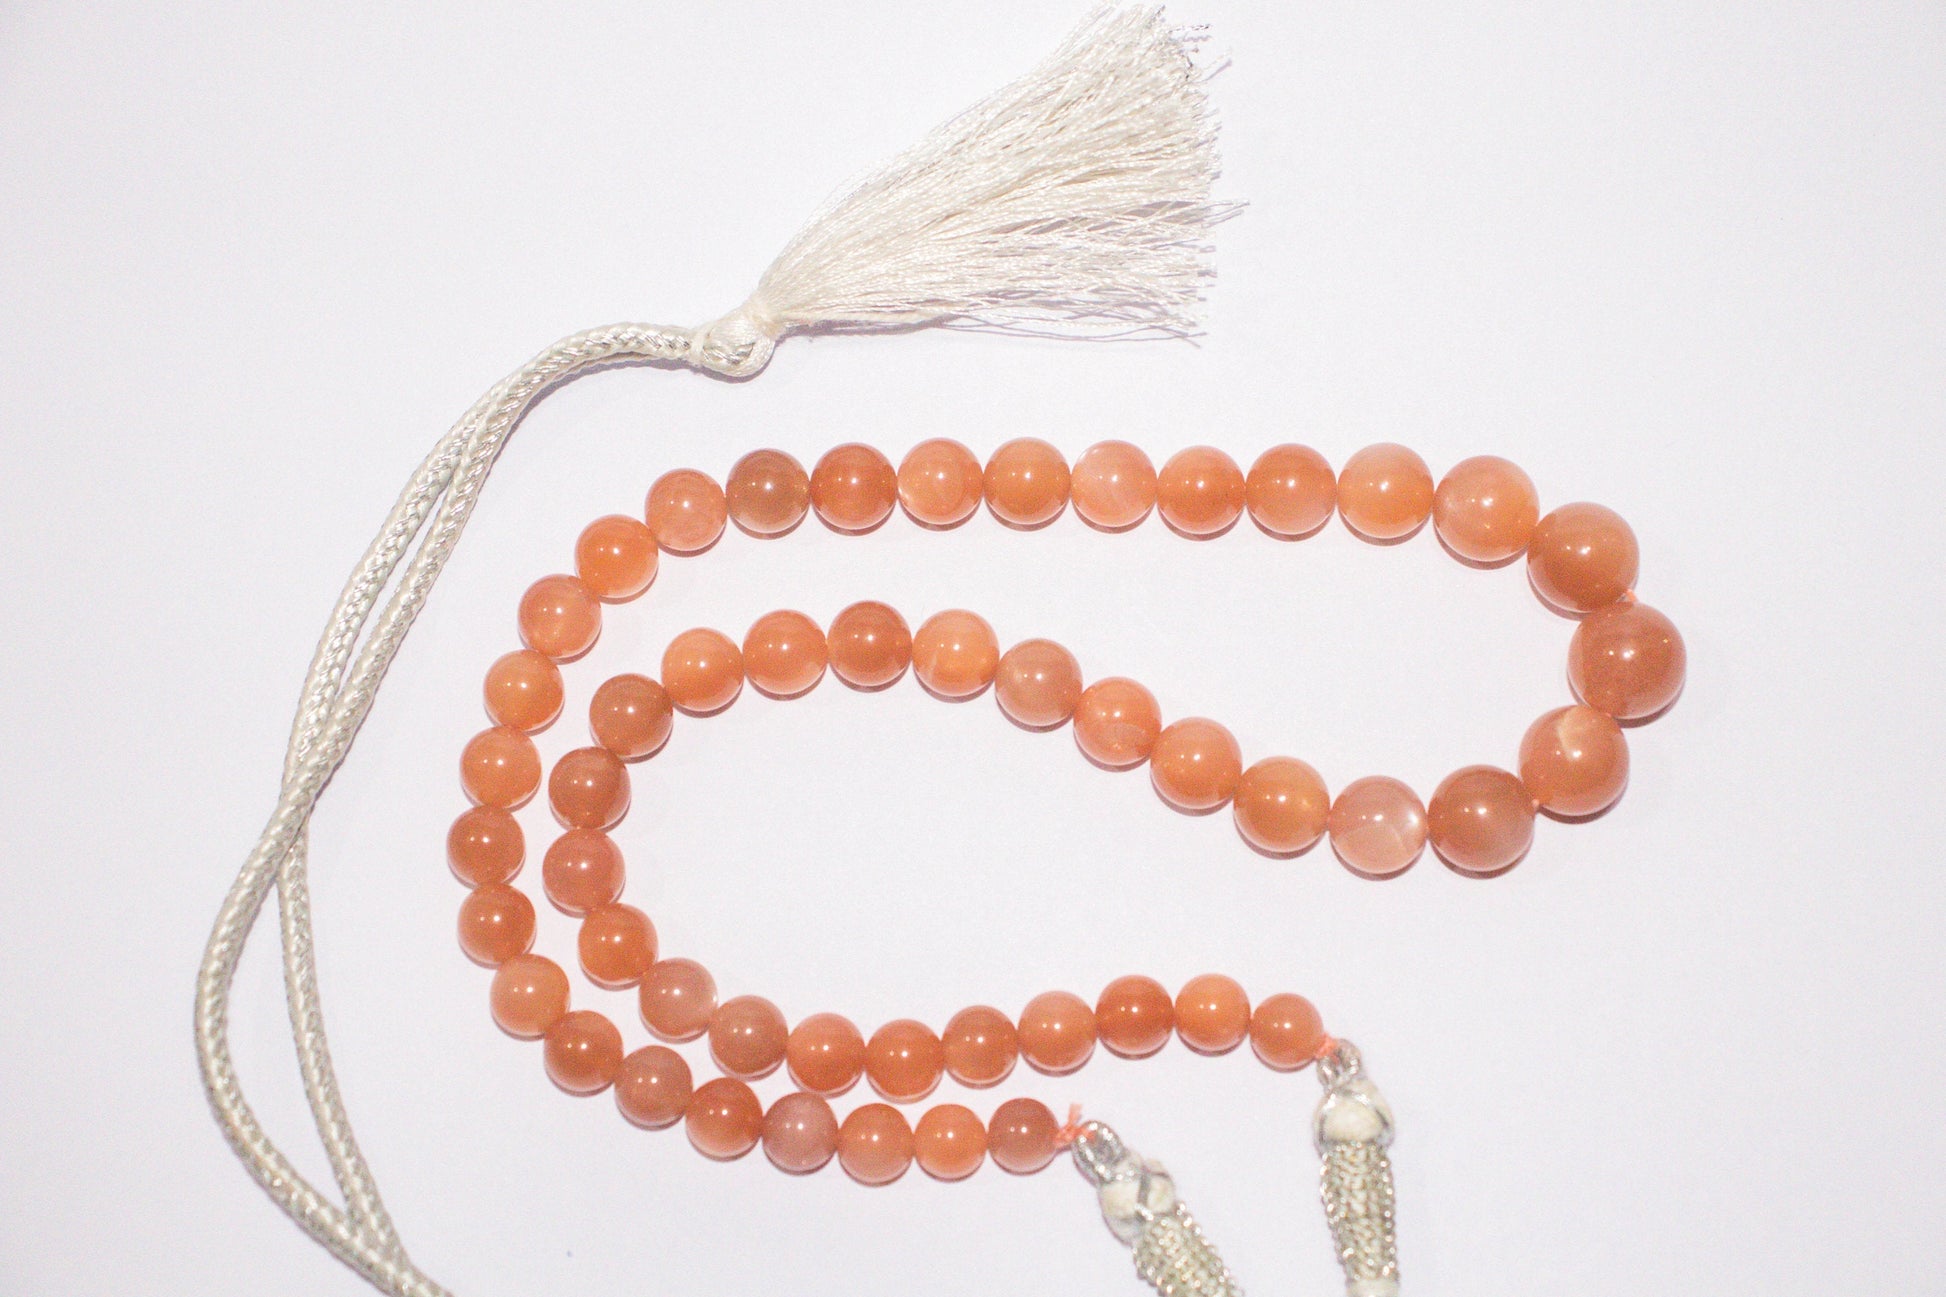 50 Pieces Orange Moonstone Smooth Beads | 5-10mm | 18 inch | Moonstone Smooth beads | Rainbow Moonstone Beads | moonstone gemstone beads | Beadsforyourjewelry